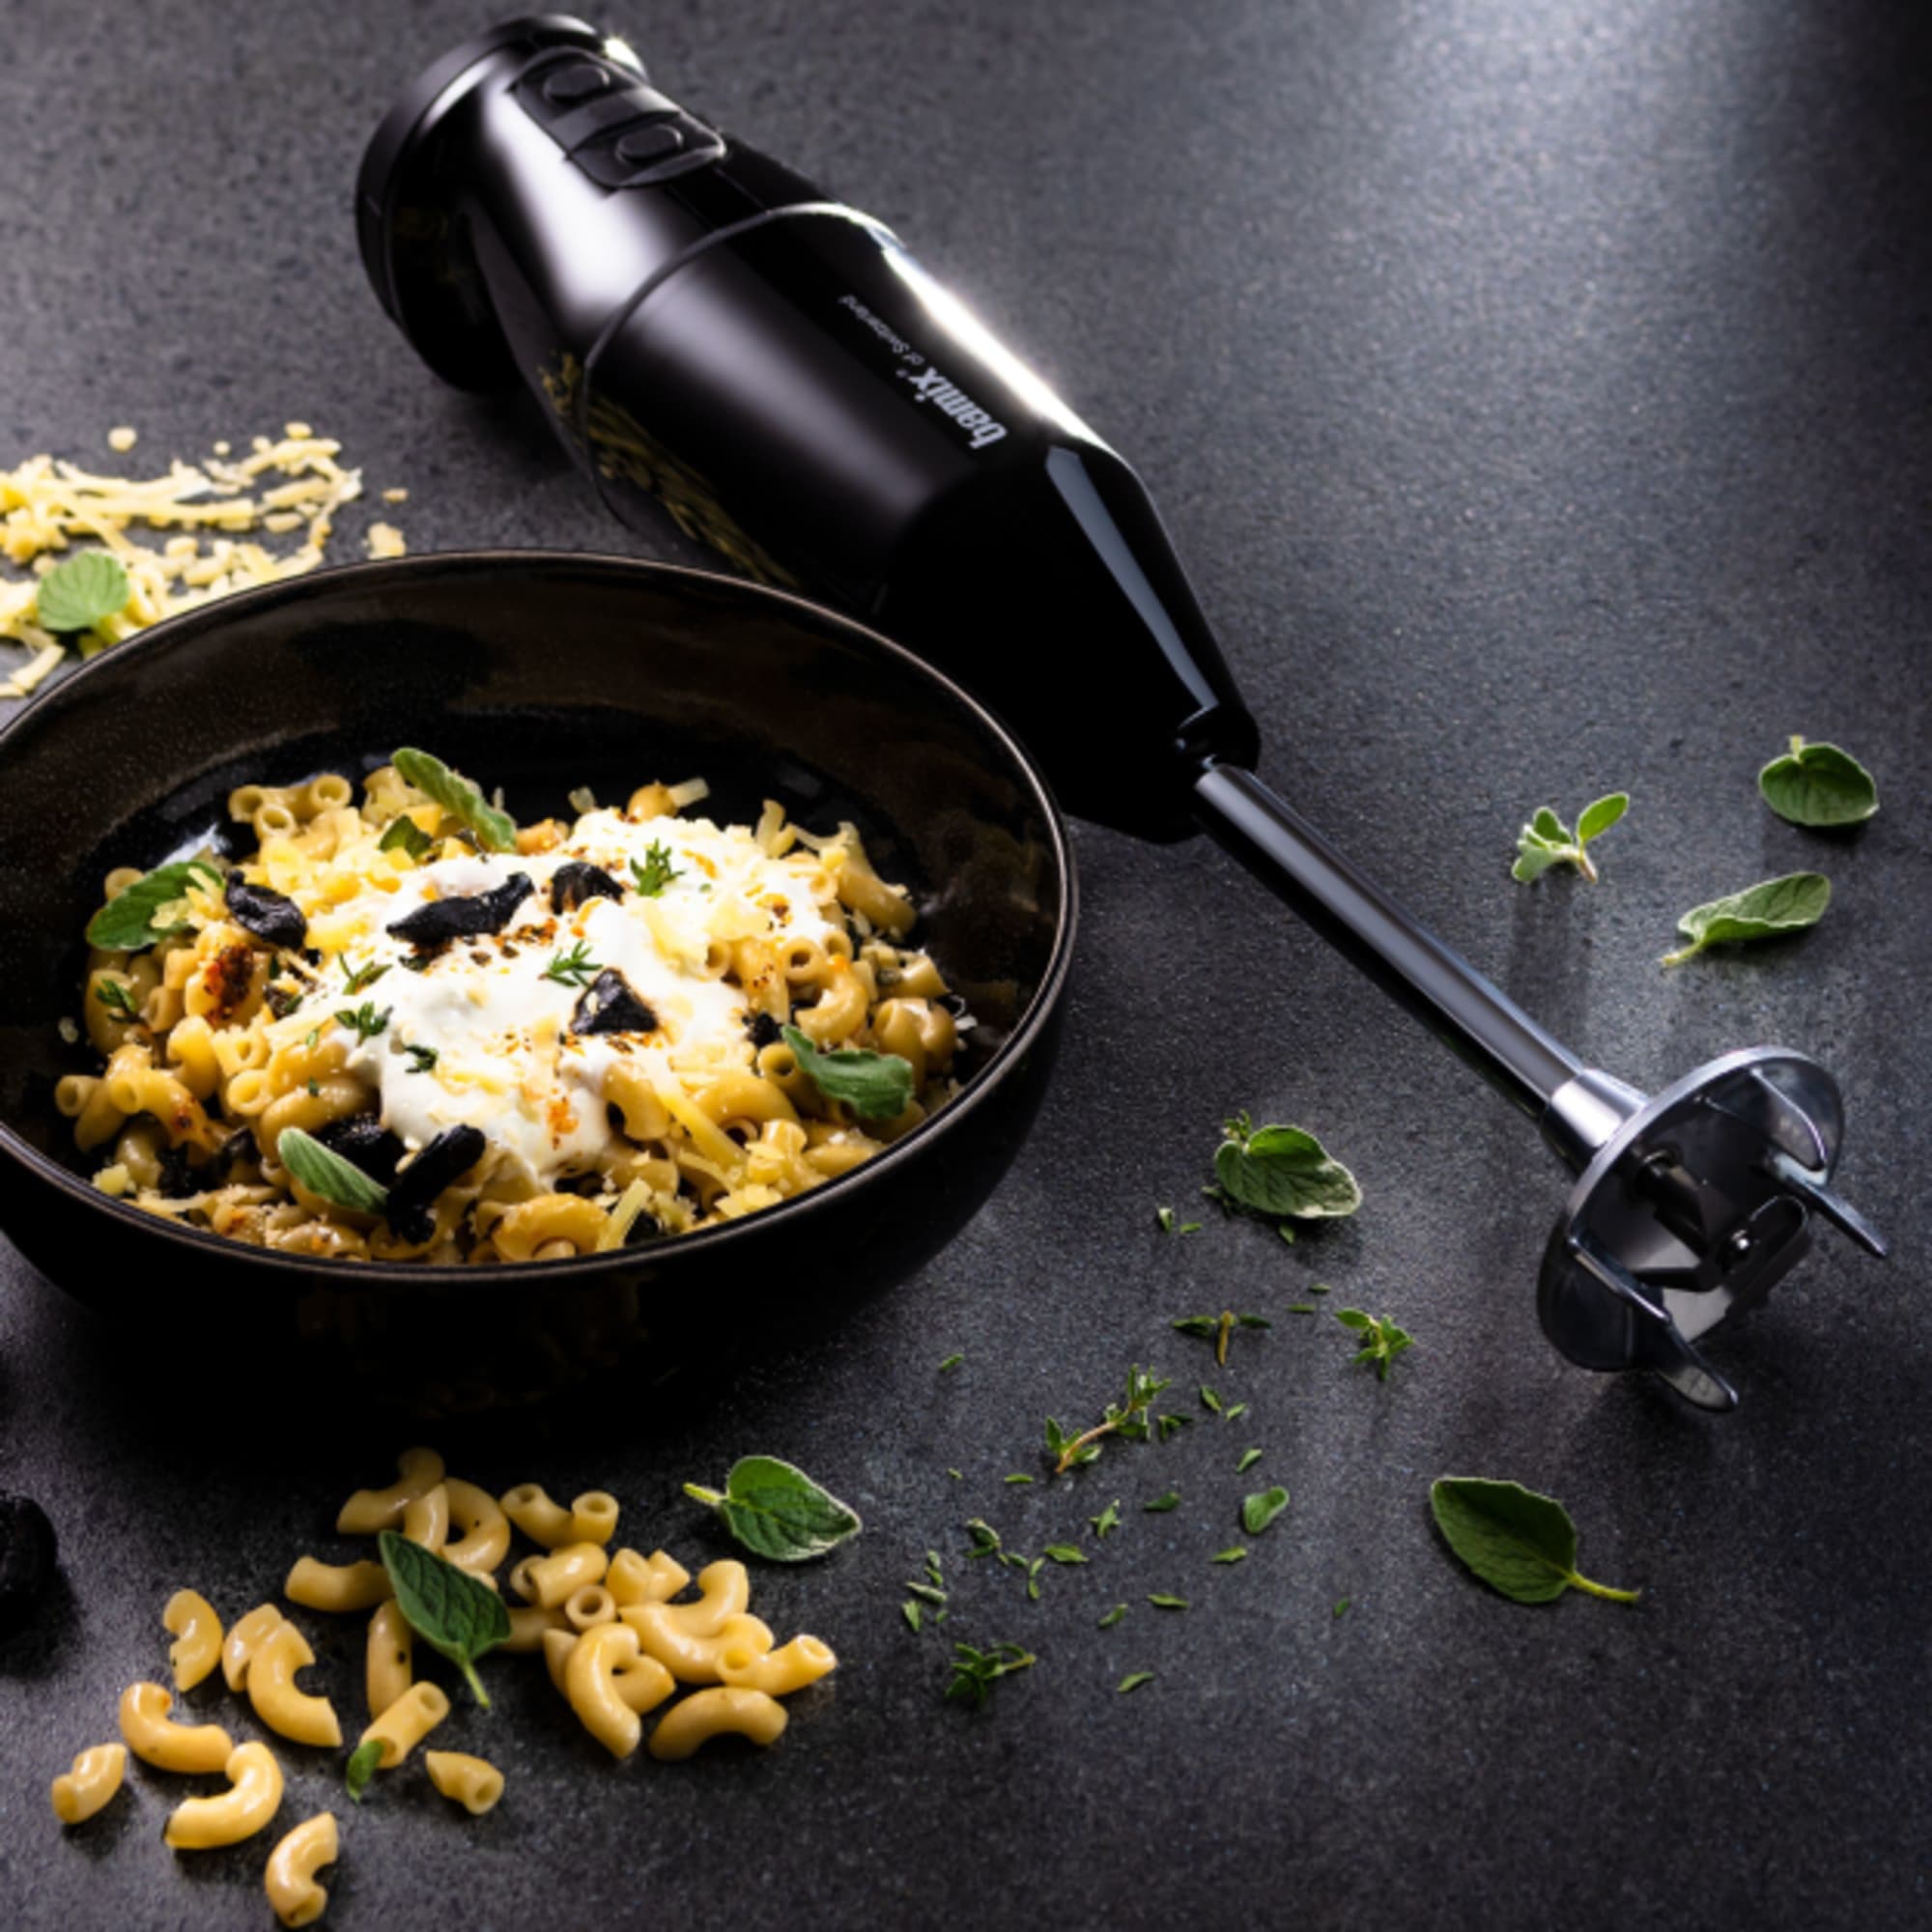 https://res.cloudinary.com/kitchenwarehouse/image/upload/c_fill,g_face,w_625/f_auto/t_PDP_2000x2000/Supplier%20Images%20/2000px/Bamix-Cordless-Plus-Immersion-Blender-Black_8_2000px.jpg?imagetype=pdp_gallery